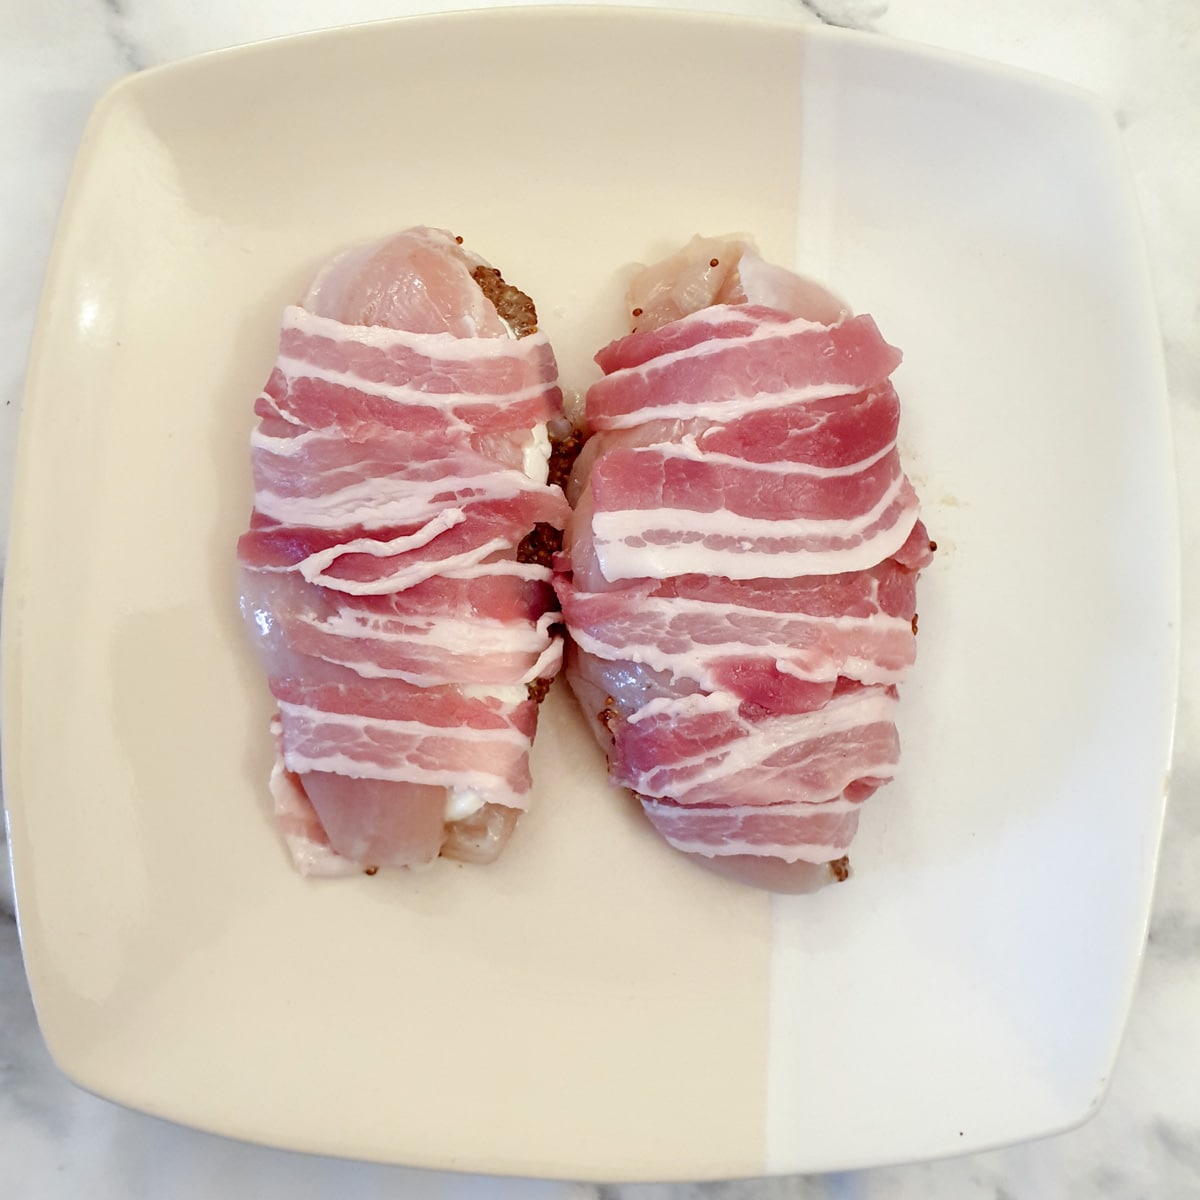 Two bacon wrapped chicken breasts on a plate.